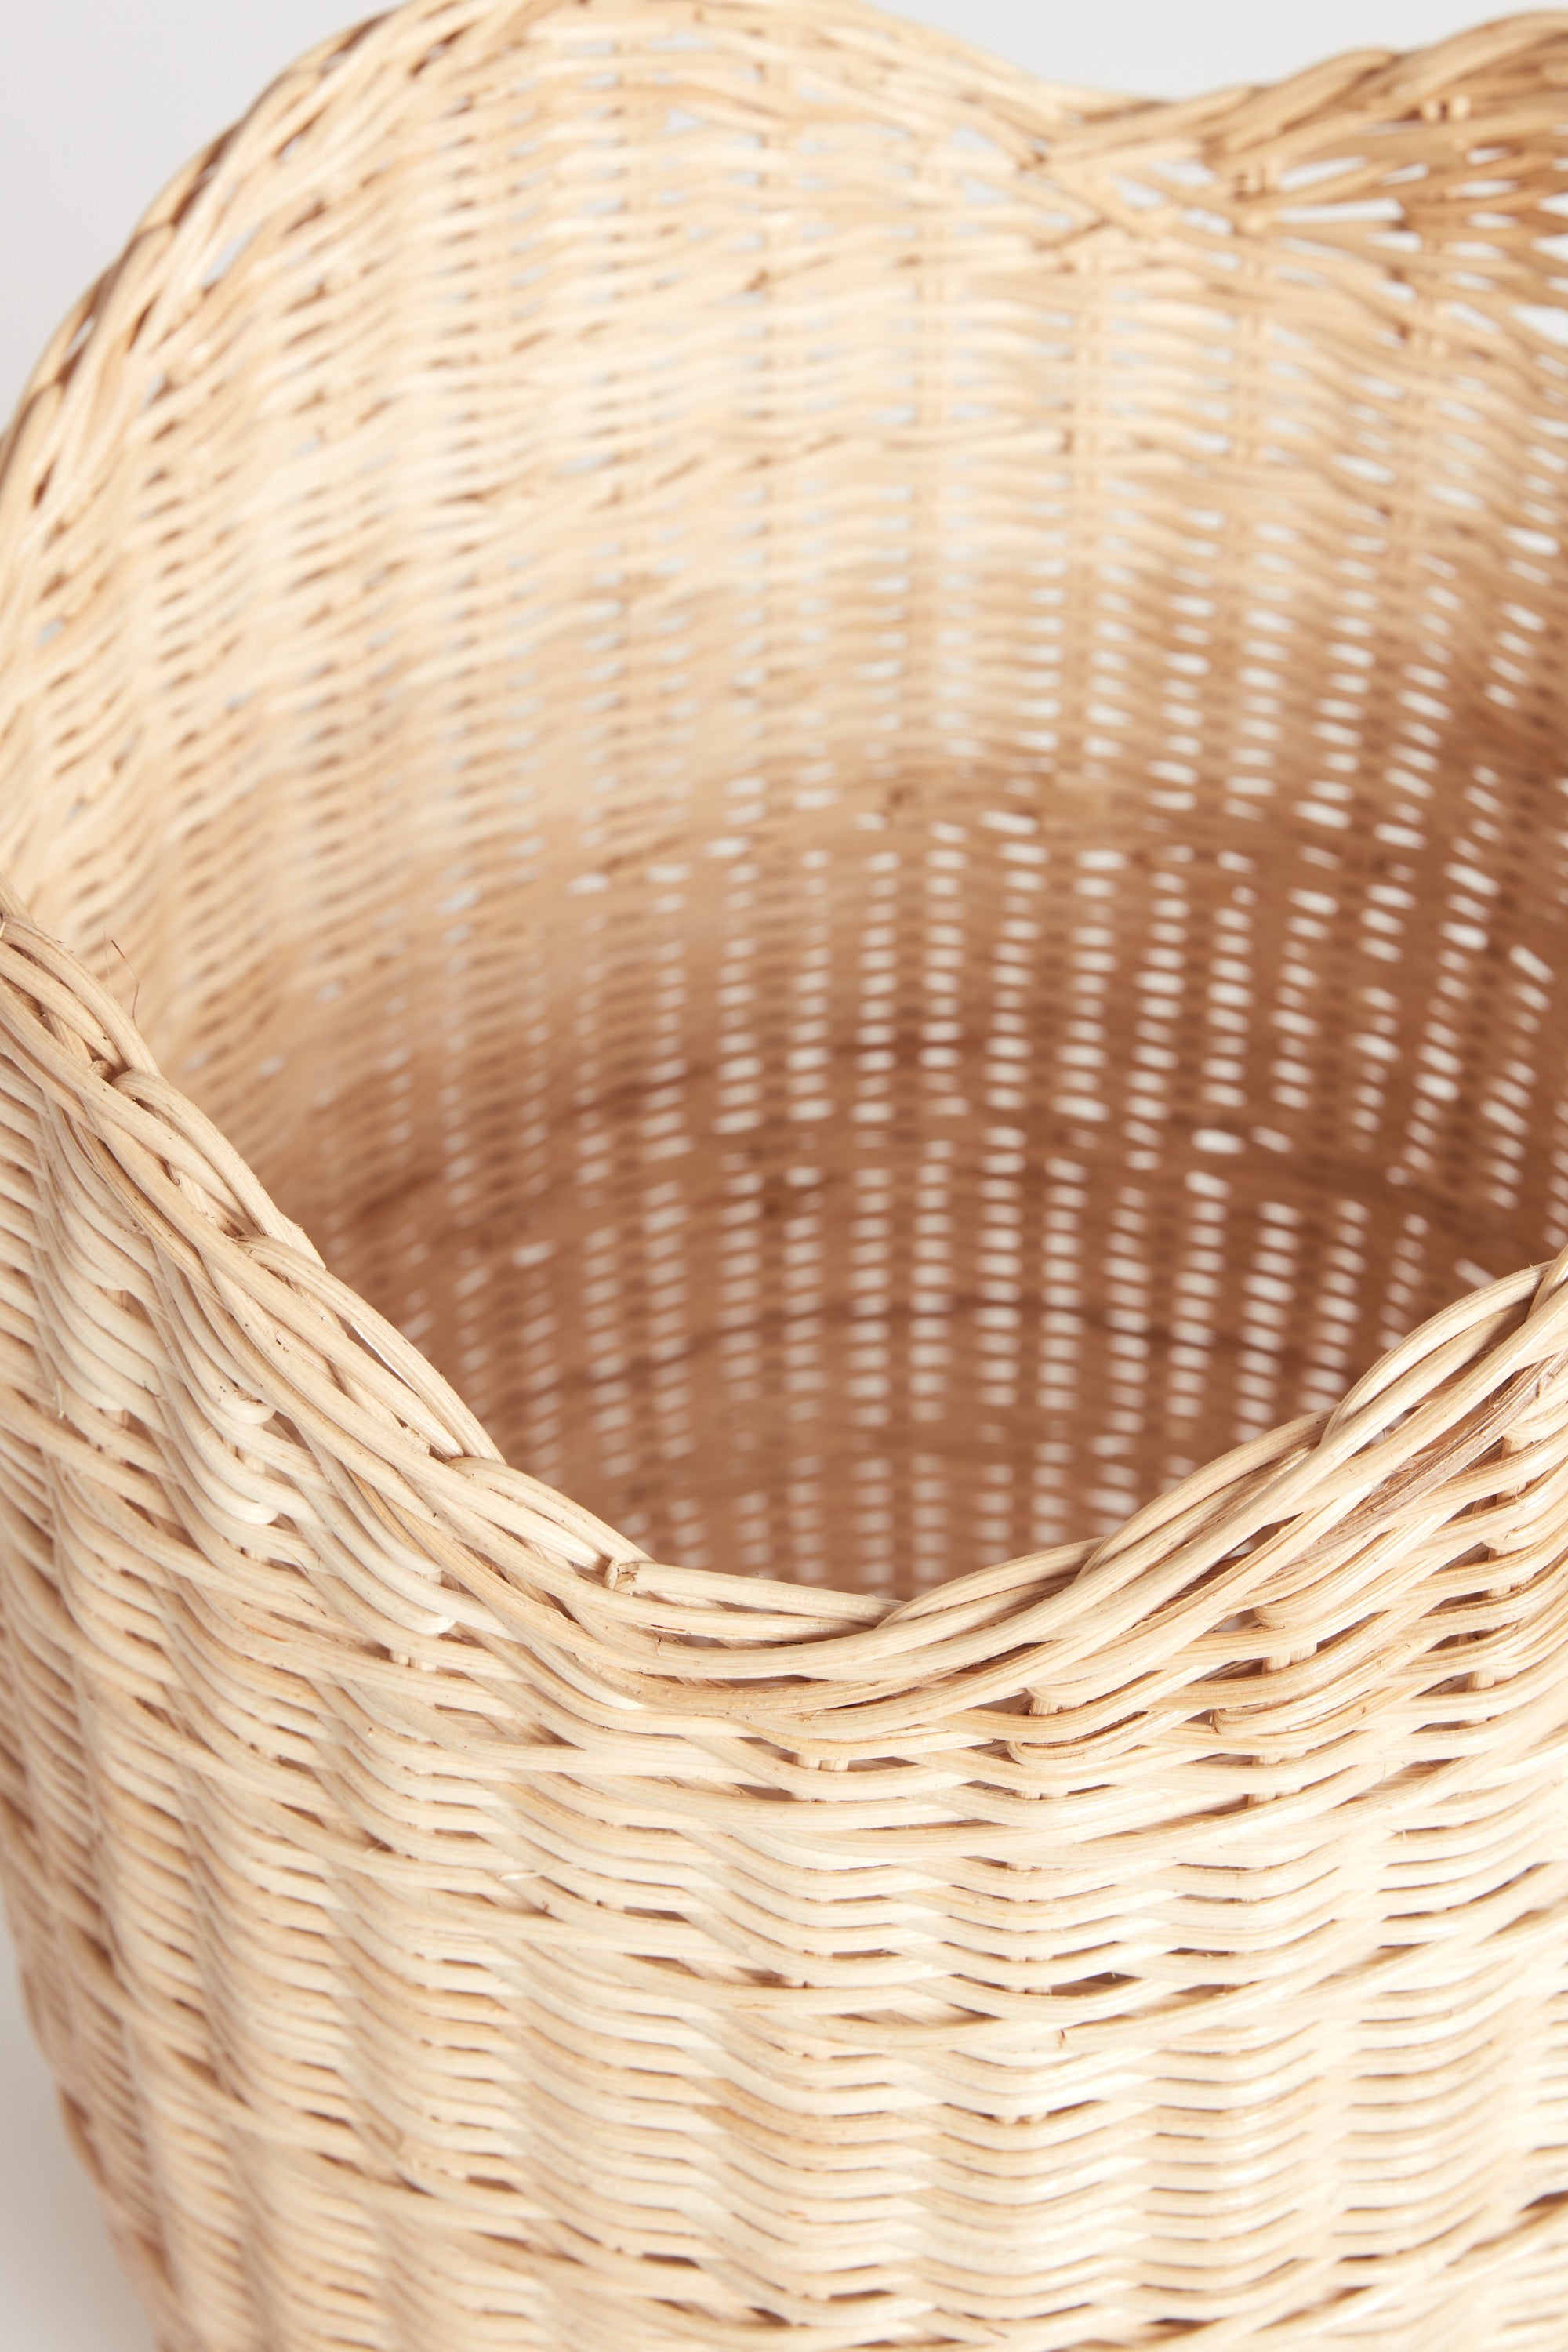 The Wave Basket in Natural